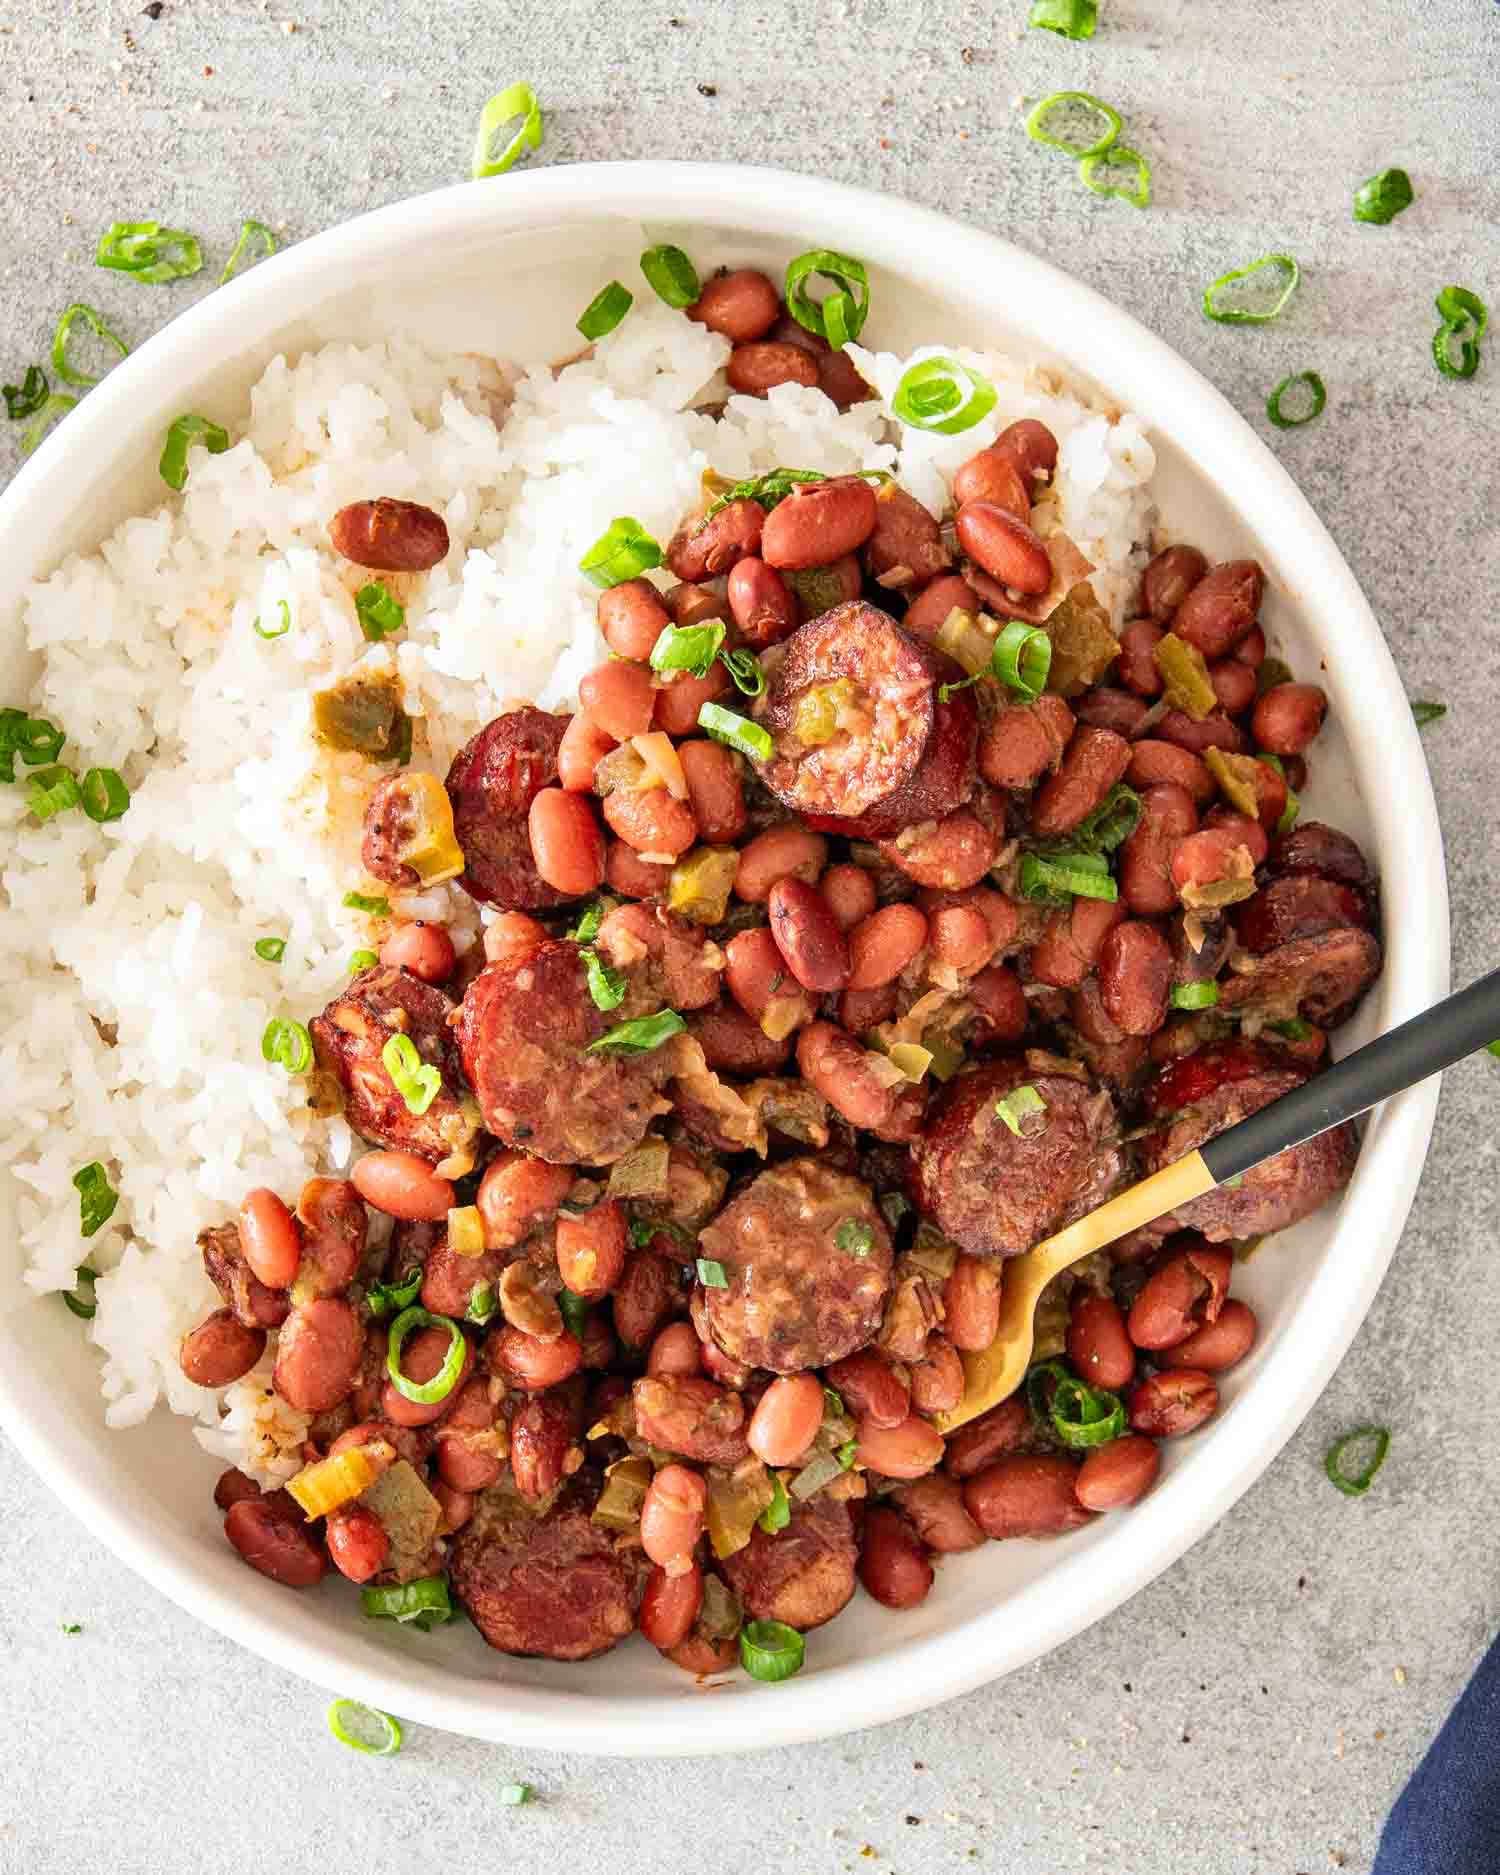 red beans and rice in a white bowl garnished with green onions.